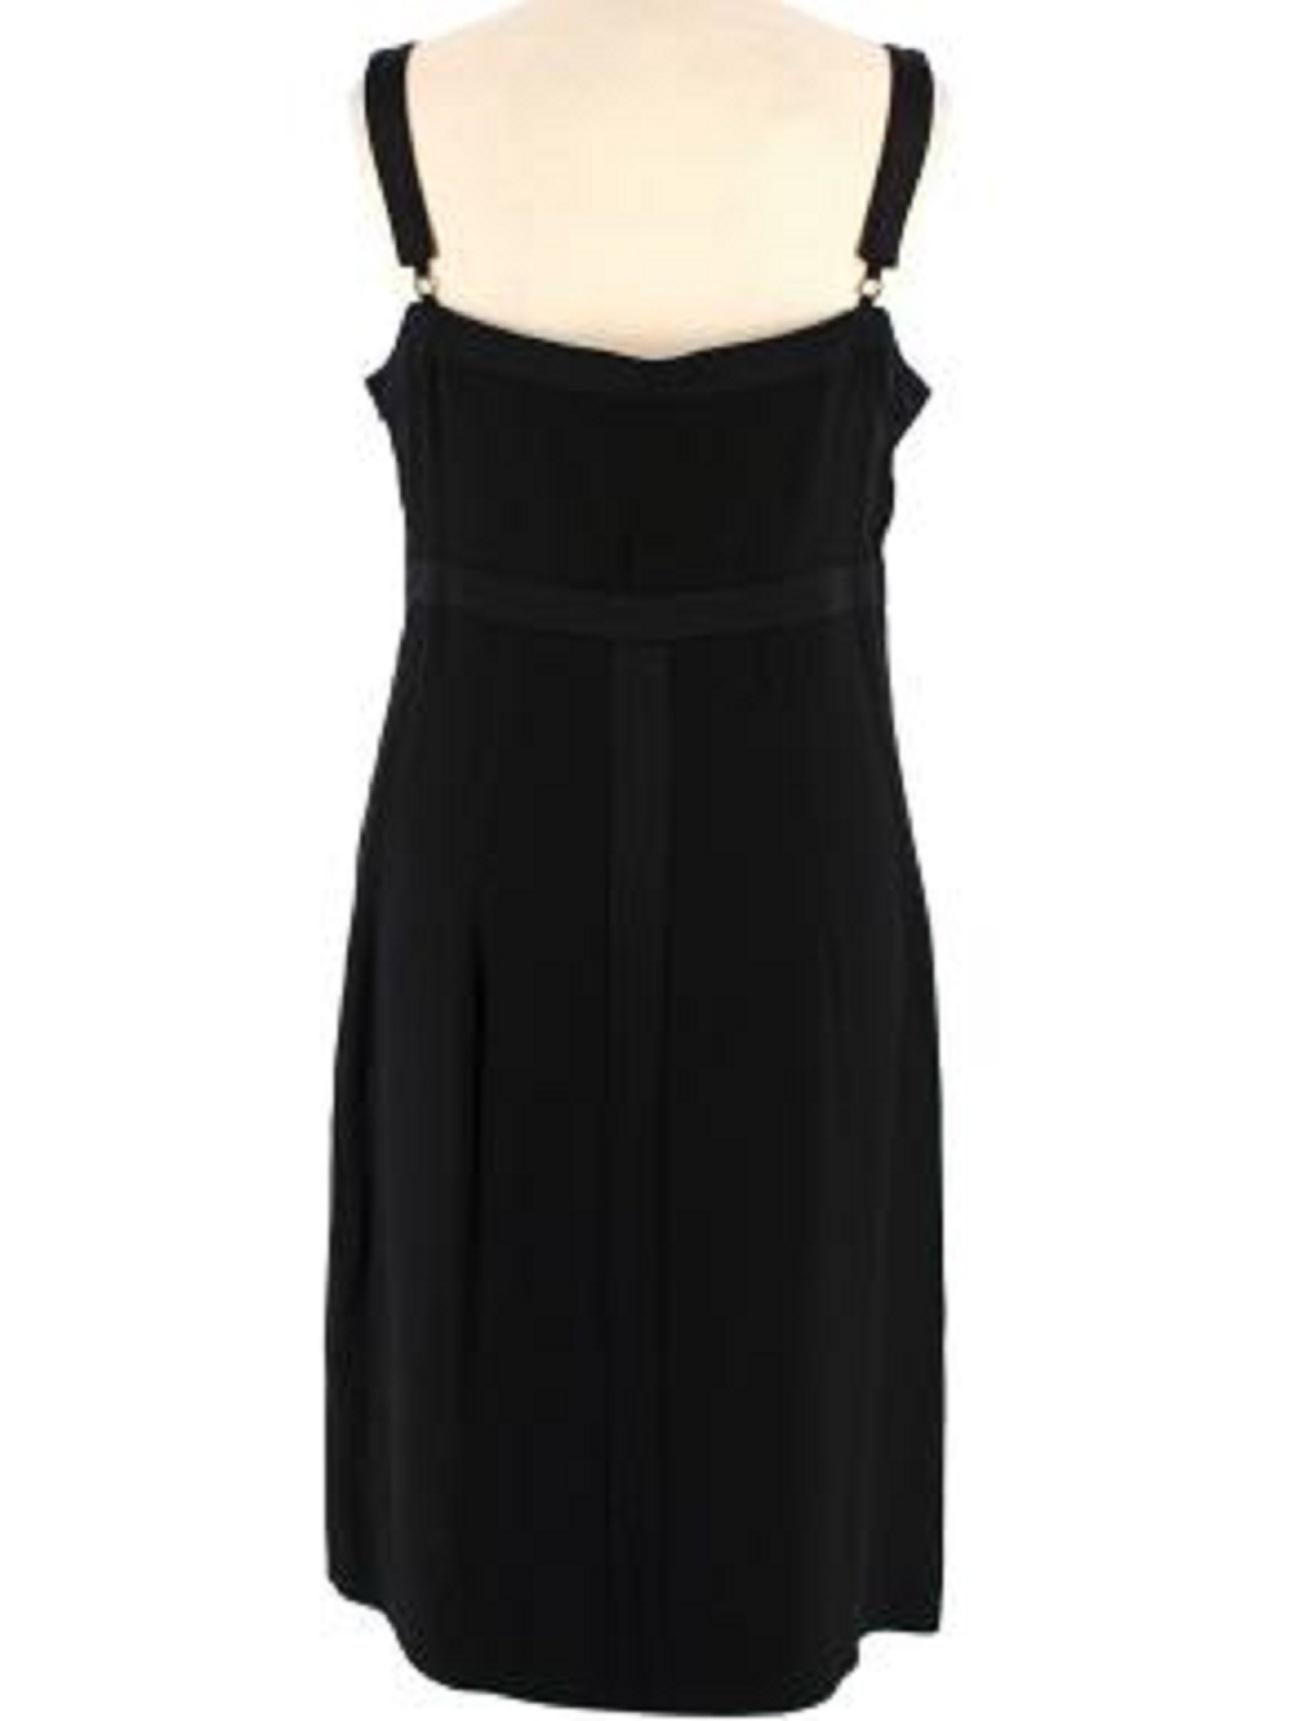 Givenchy Mesh Panelled Little Black Dress In Good Condition For Sale In London, GB